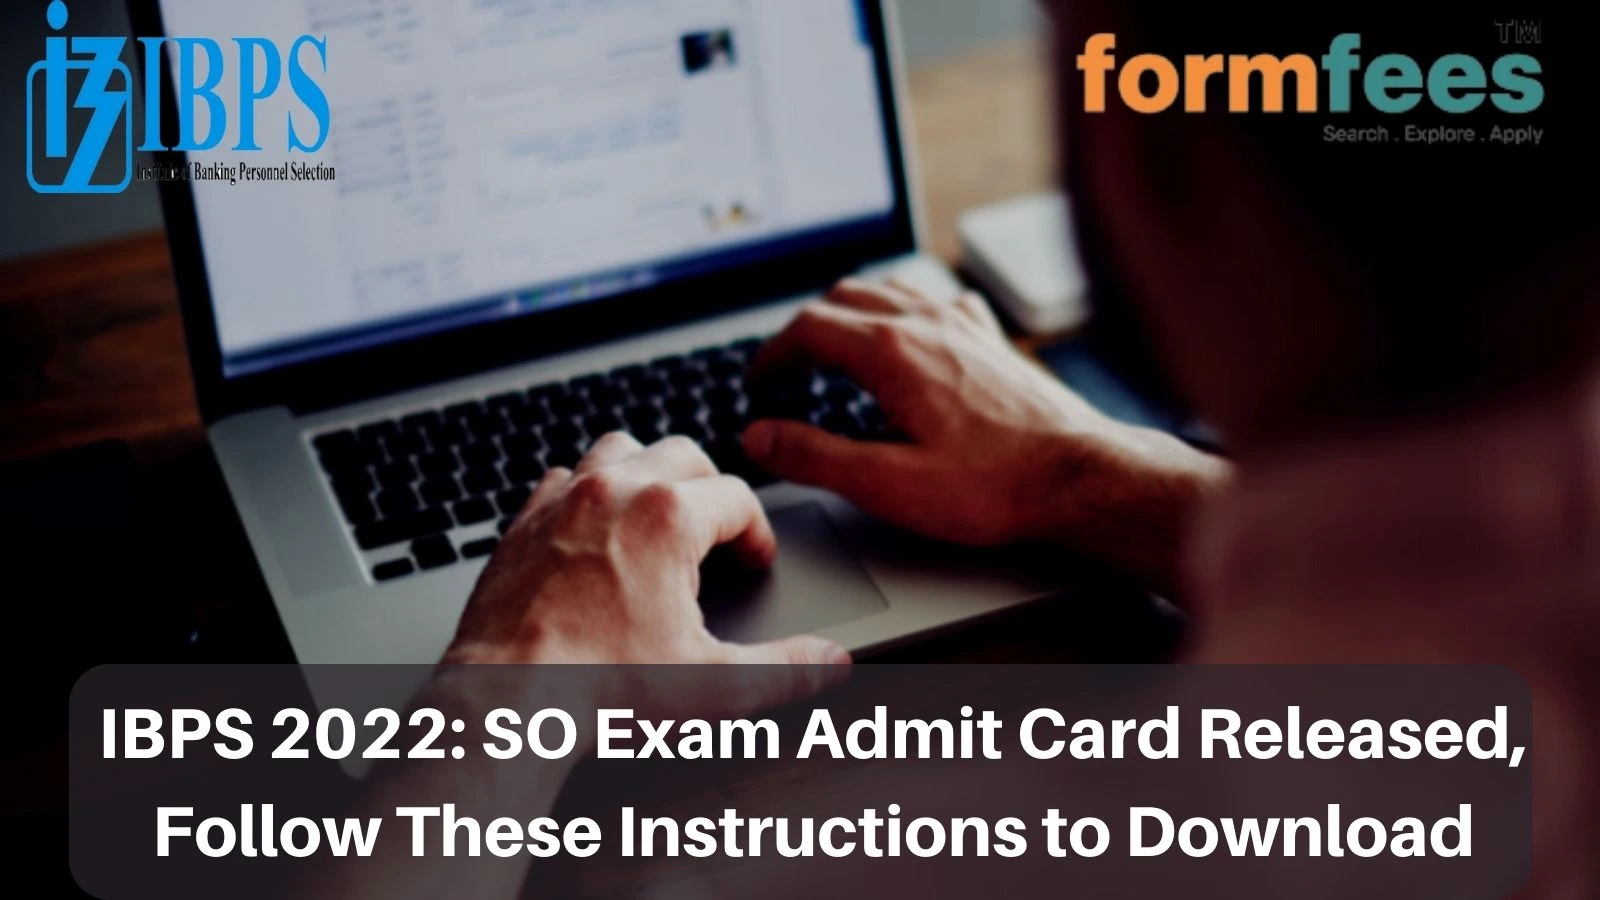 IBPS 2022: SO Exam Admit Card Released, Follow These Instructions to Download